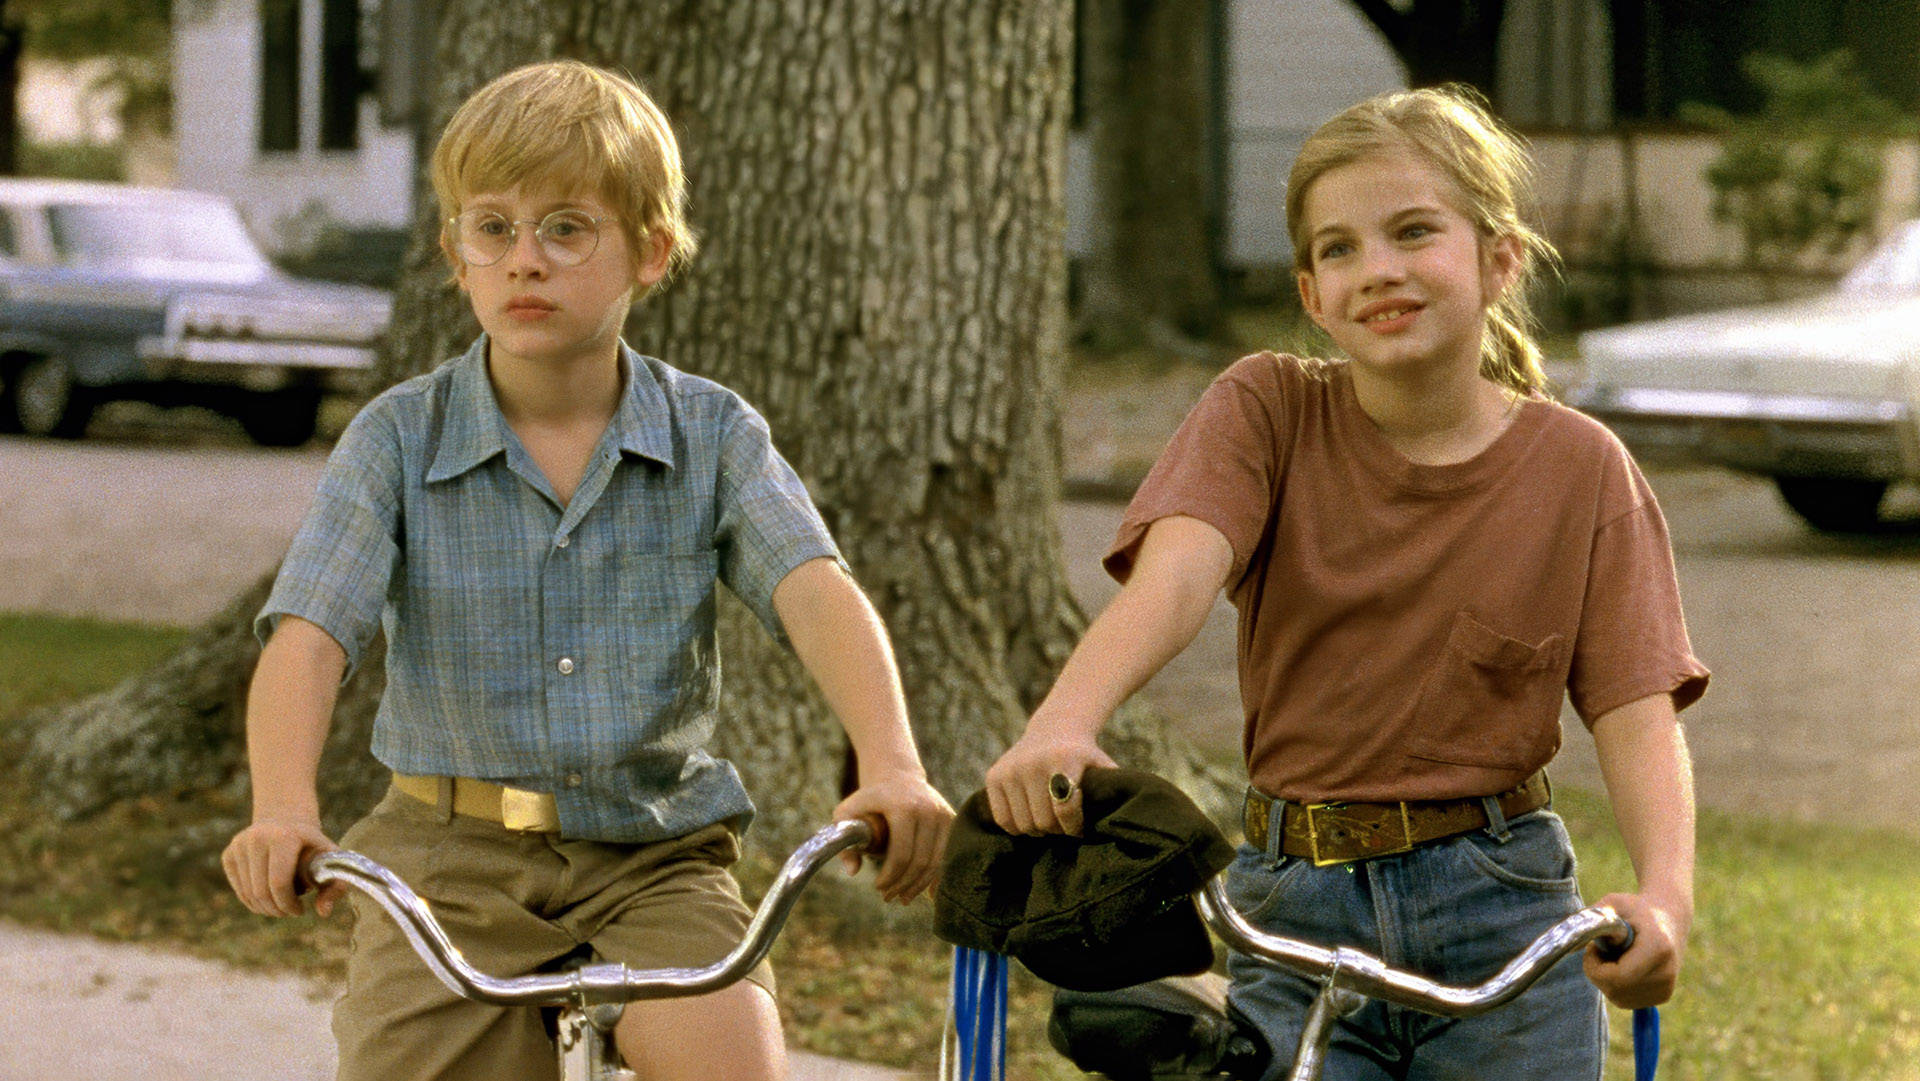 Not Just for Teens: 15 Coming-of-Age Films That Resonate at Any Age